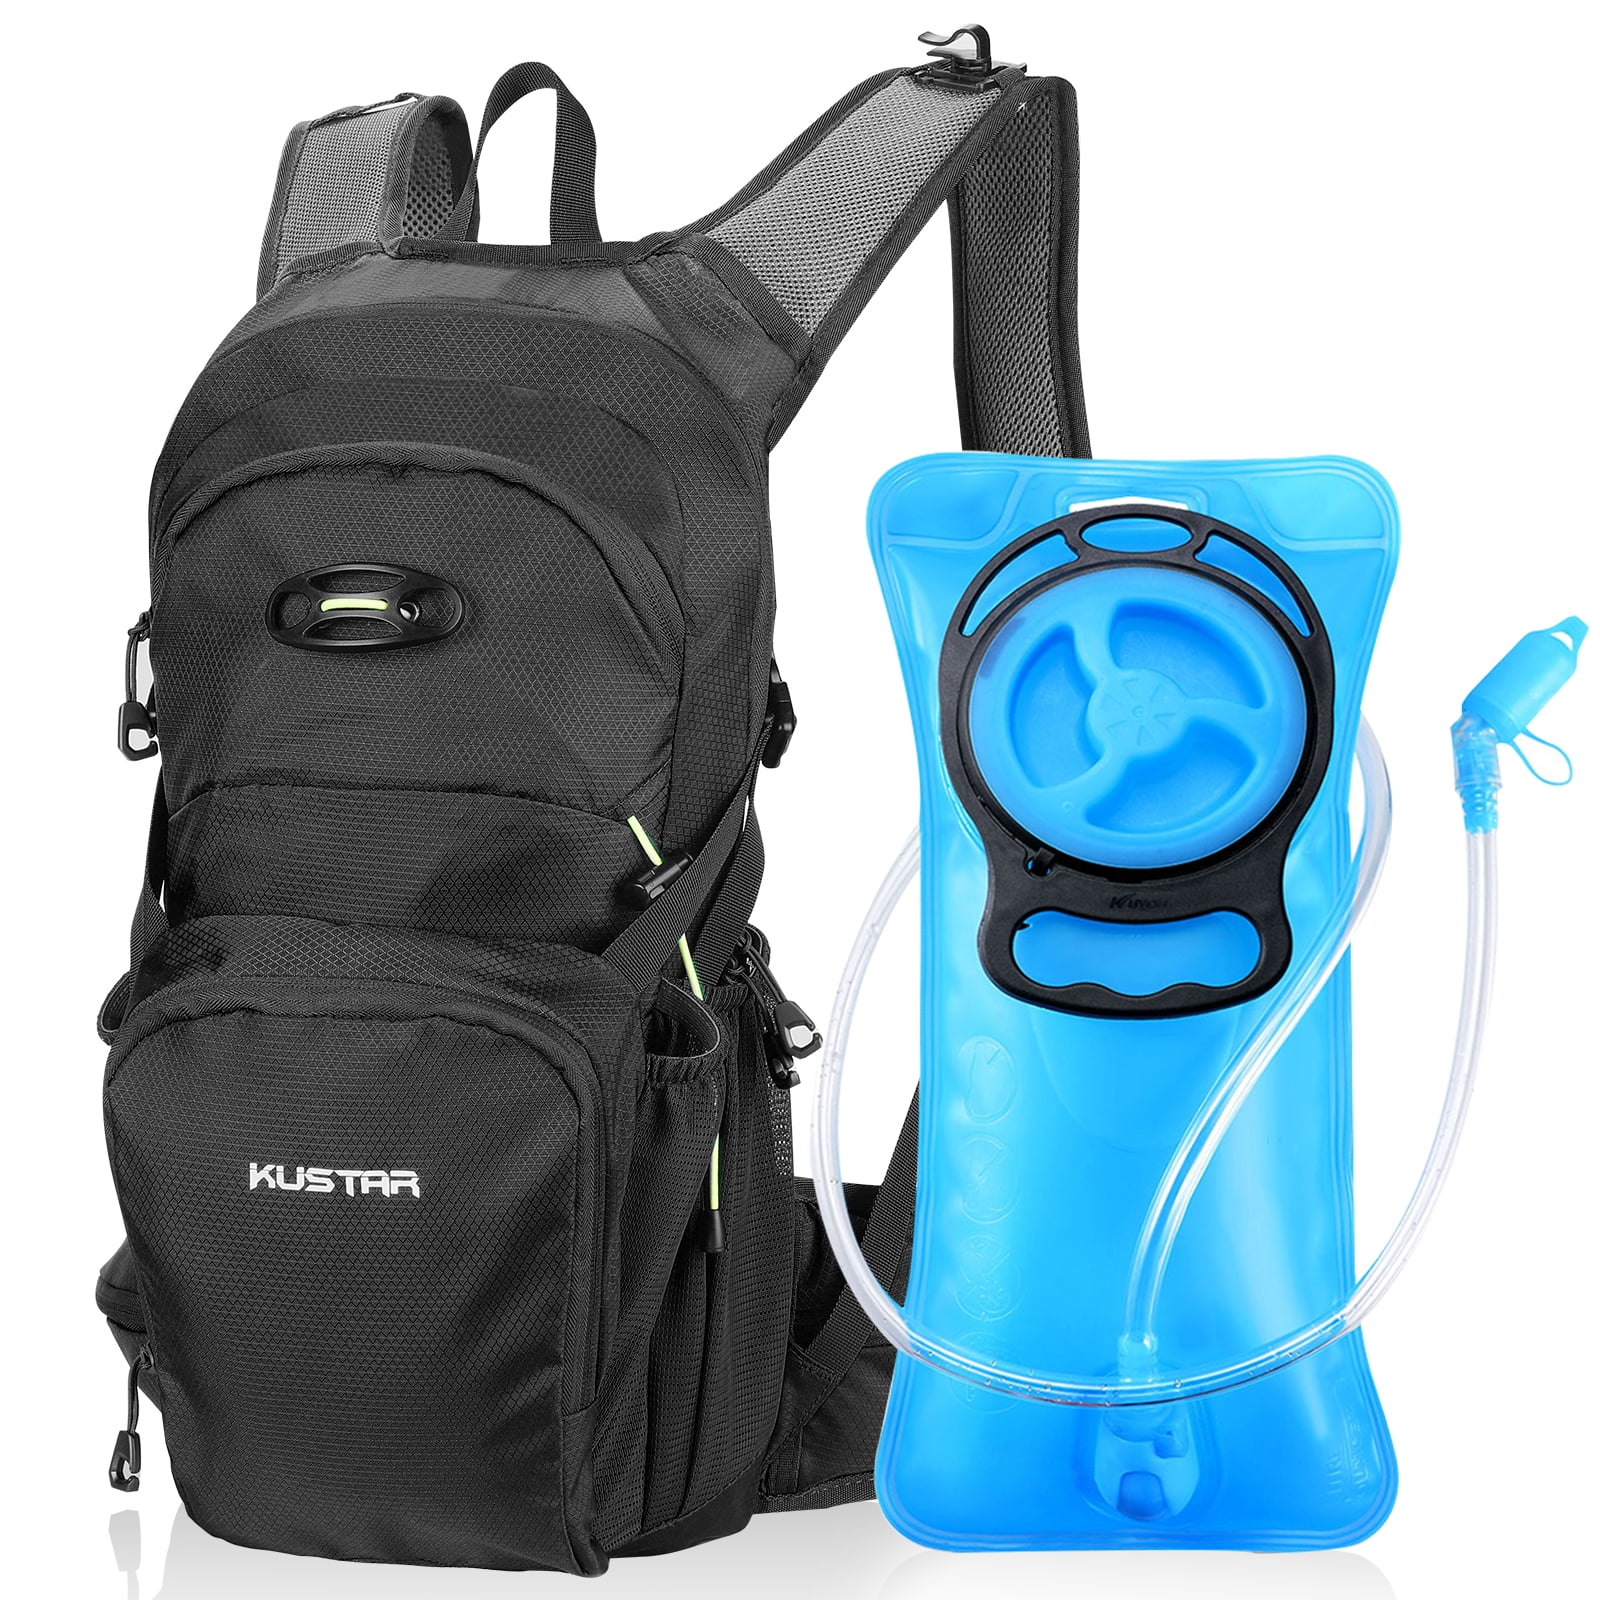 Backpack & FREE Waist Pouch Large Capacity! PREMIUM Water Hydration Bladder 